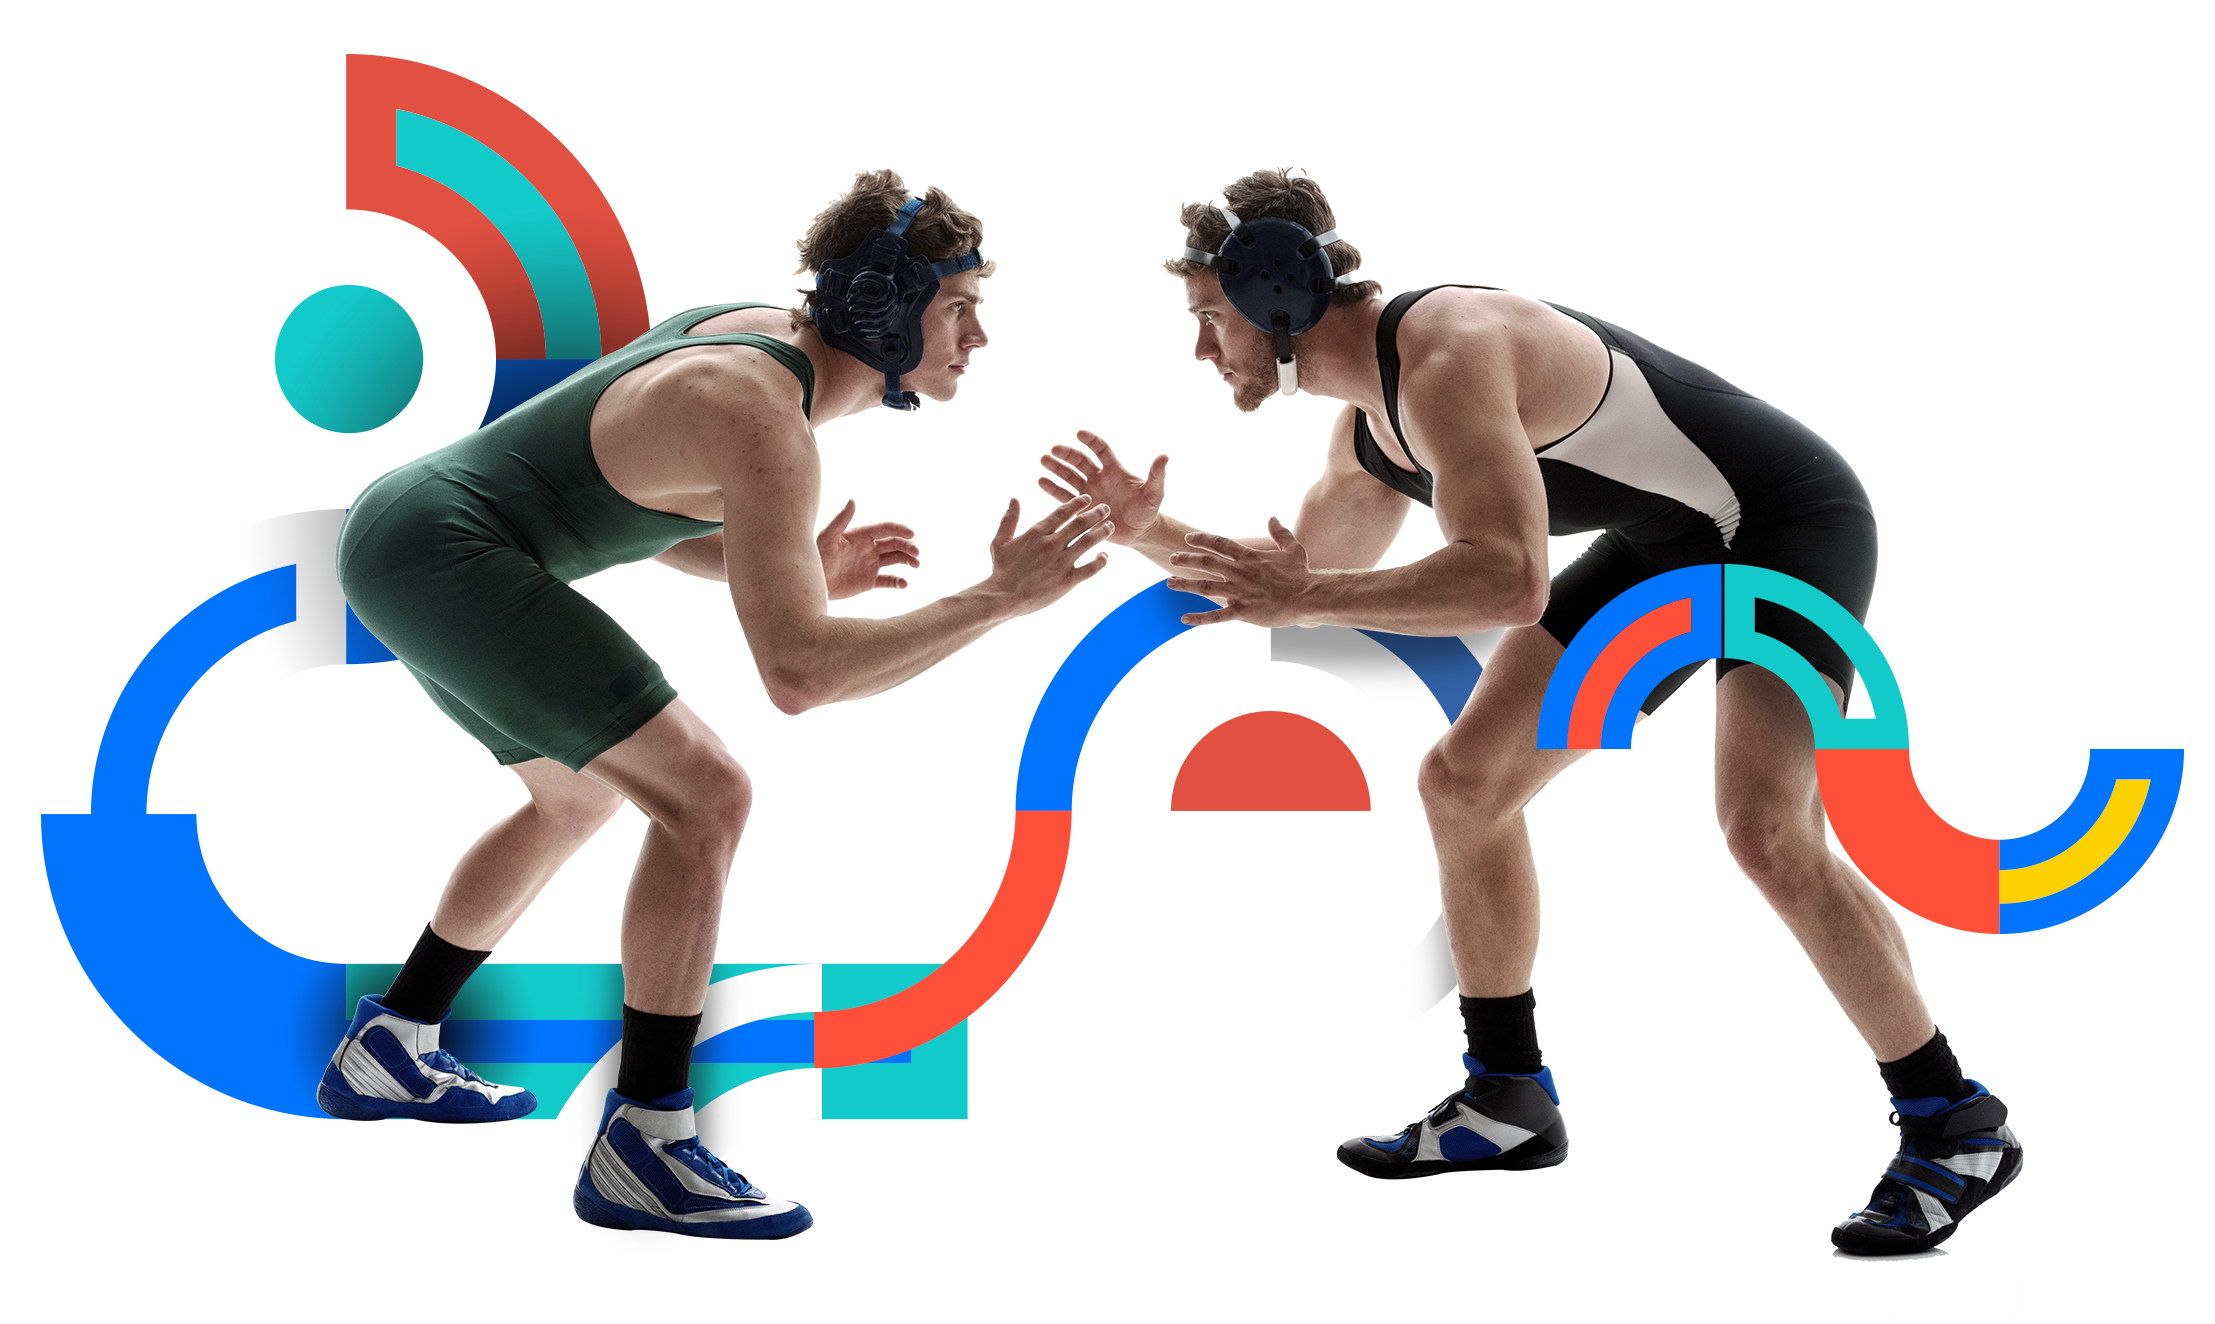 In the picture, there are two wrestlers in position to start a combat.